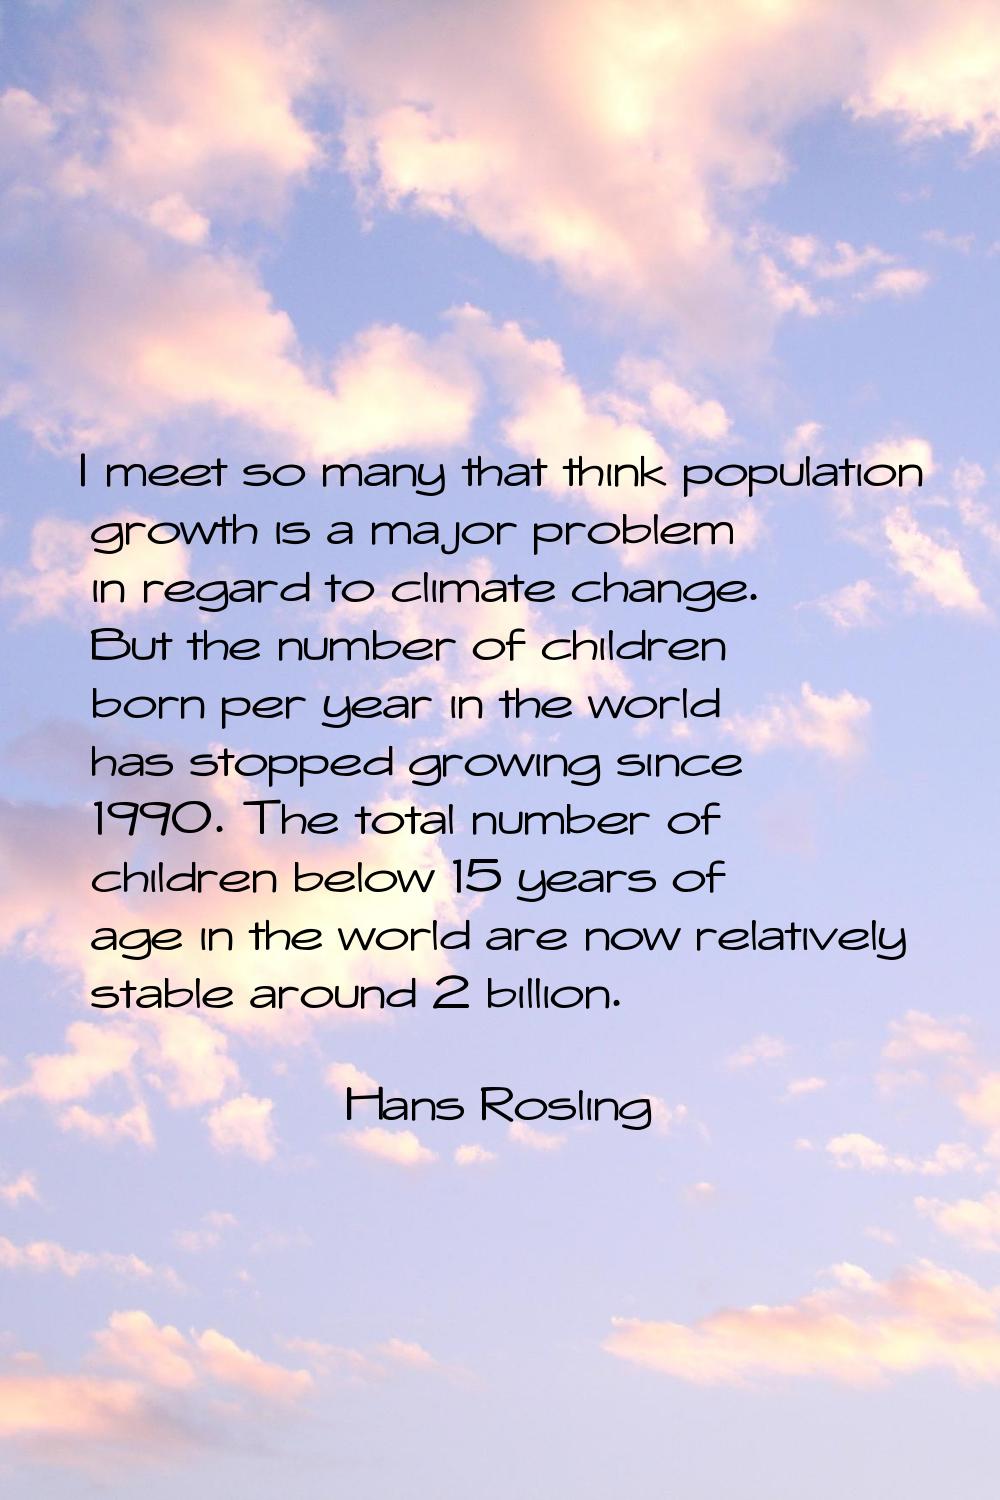 I meet so many that think population growth is a major problem in regard to climate change. But the